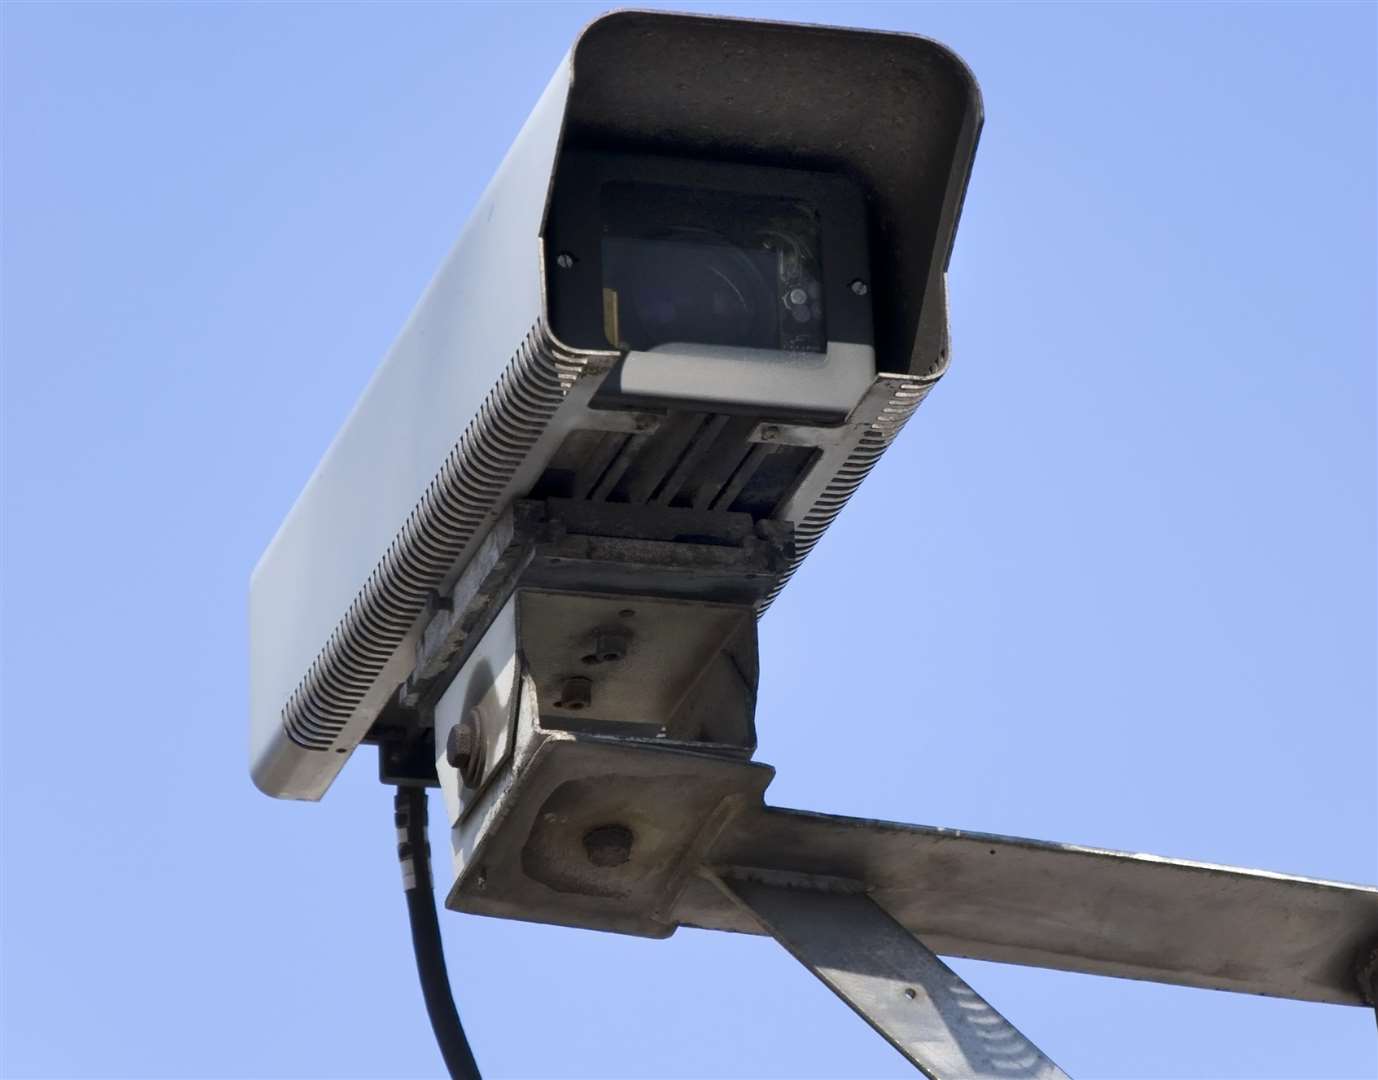 Medway Commercial Group runs CCTV cameras for the council